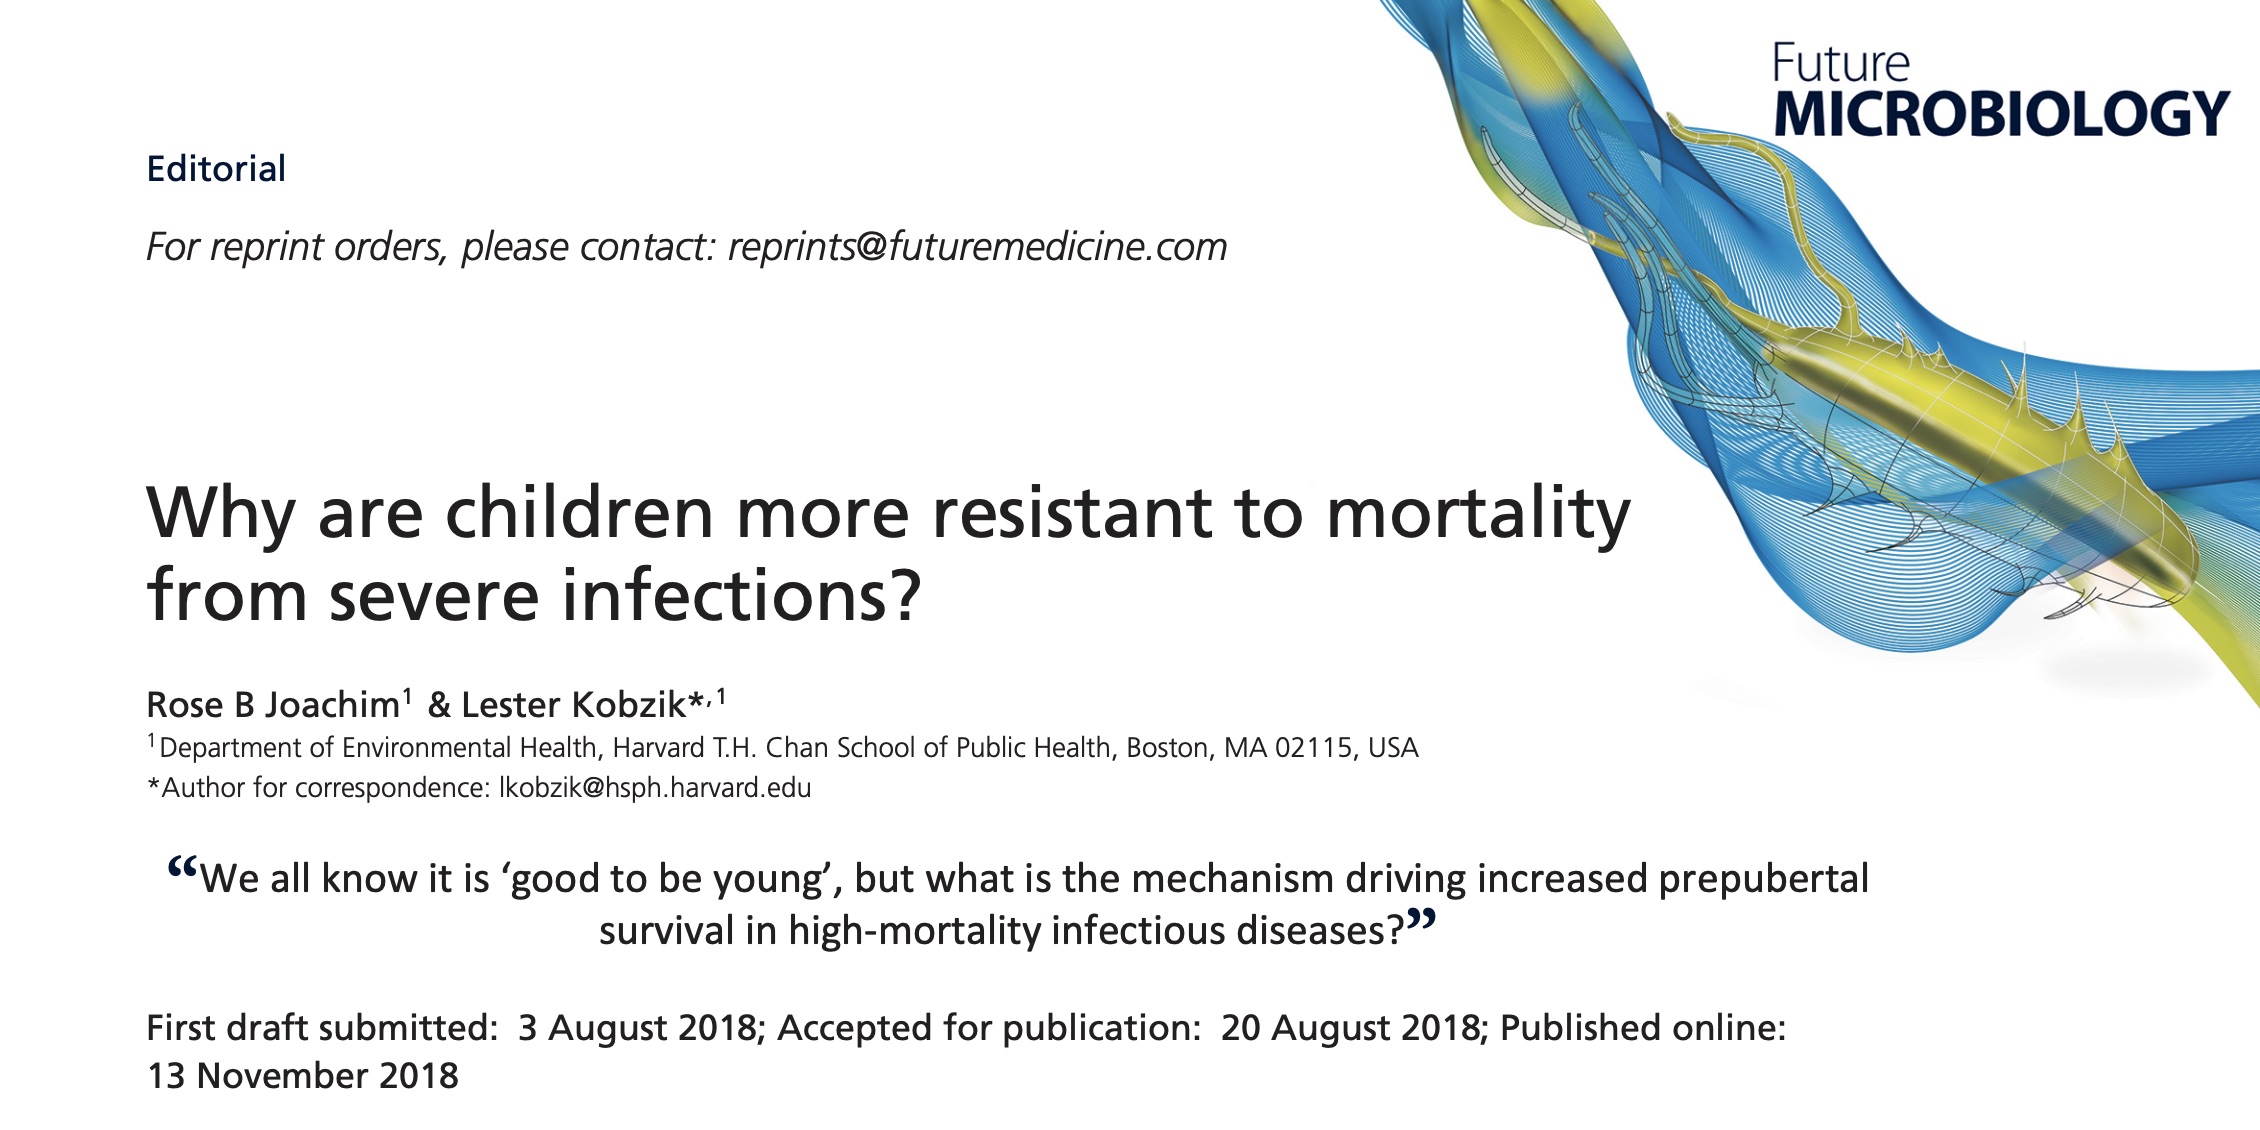 Why are children more resistant to mortality from severe infections?